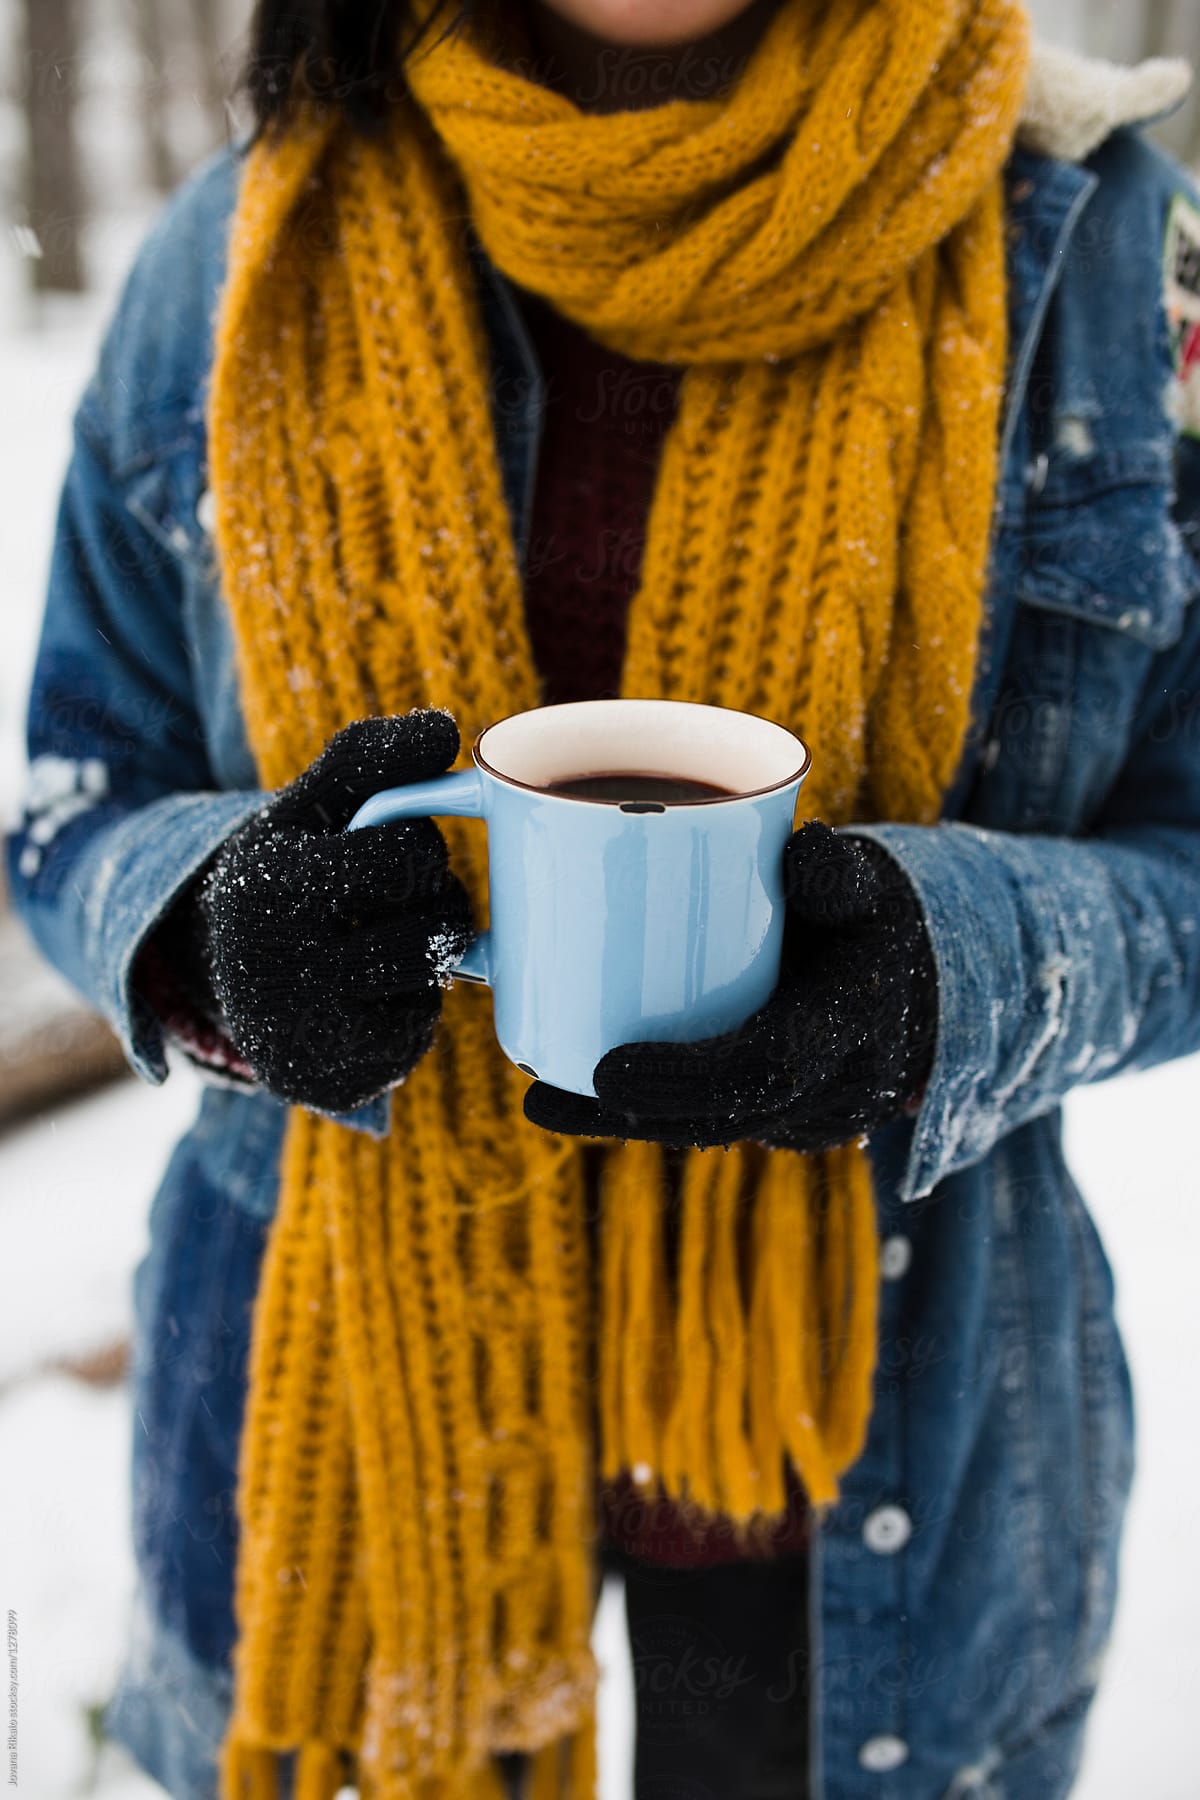 Young woman drinking mulled wine on a cold wintery day